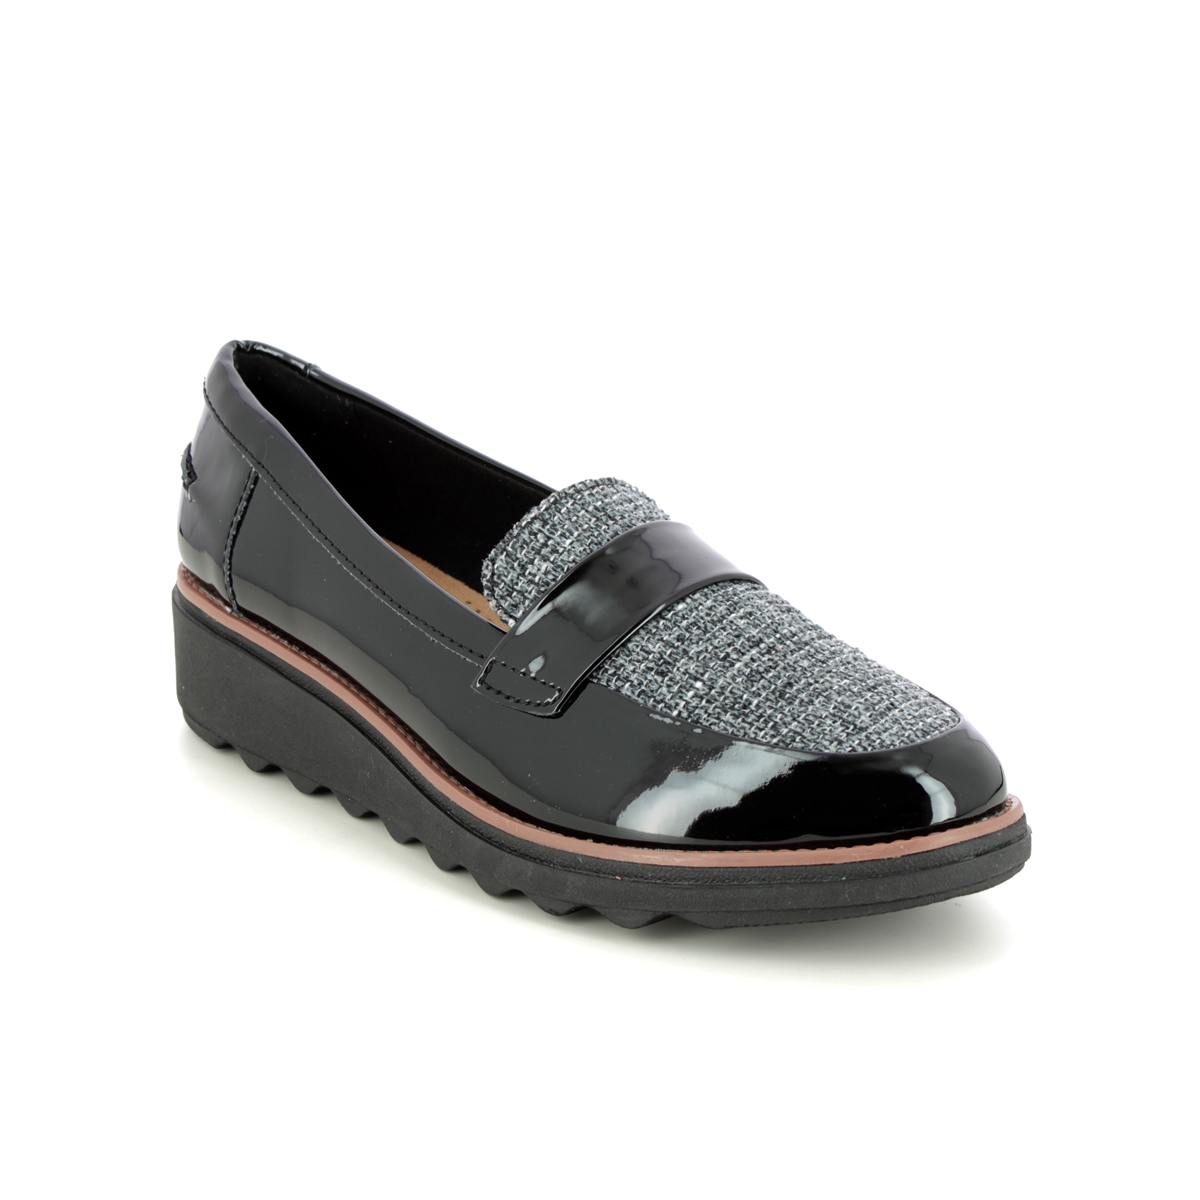 Clarks Sharon Gracie Black patent Womens loafers 6408-24D in a Plain Leather in Size 5